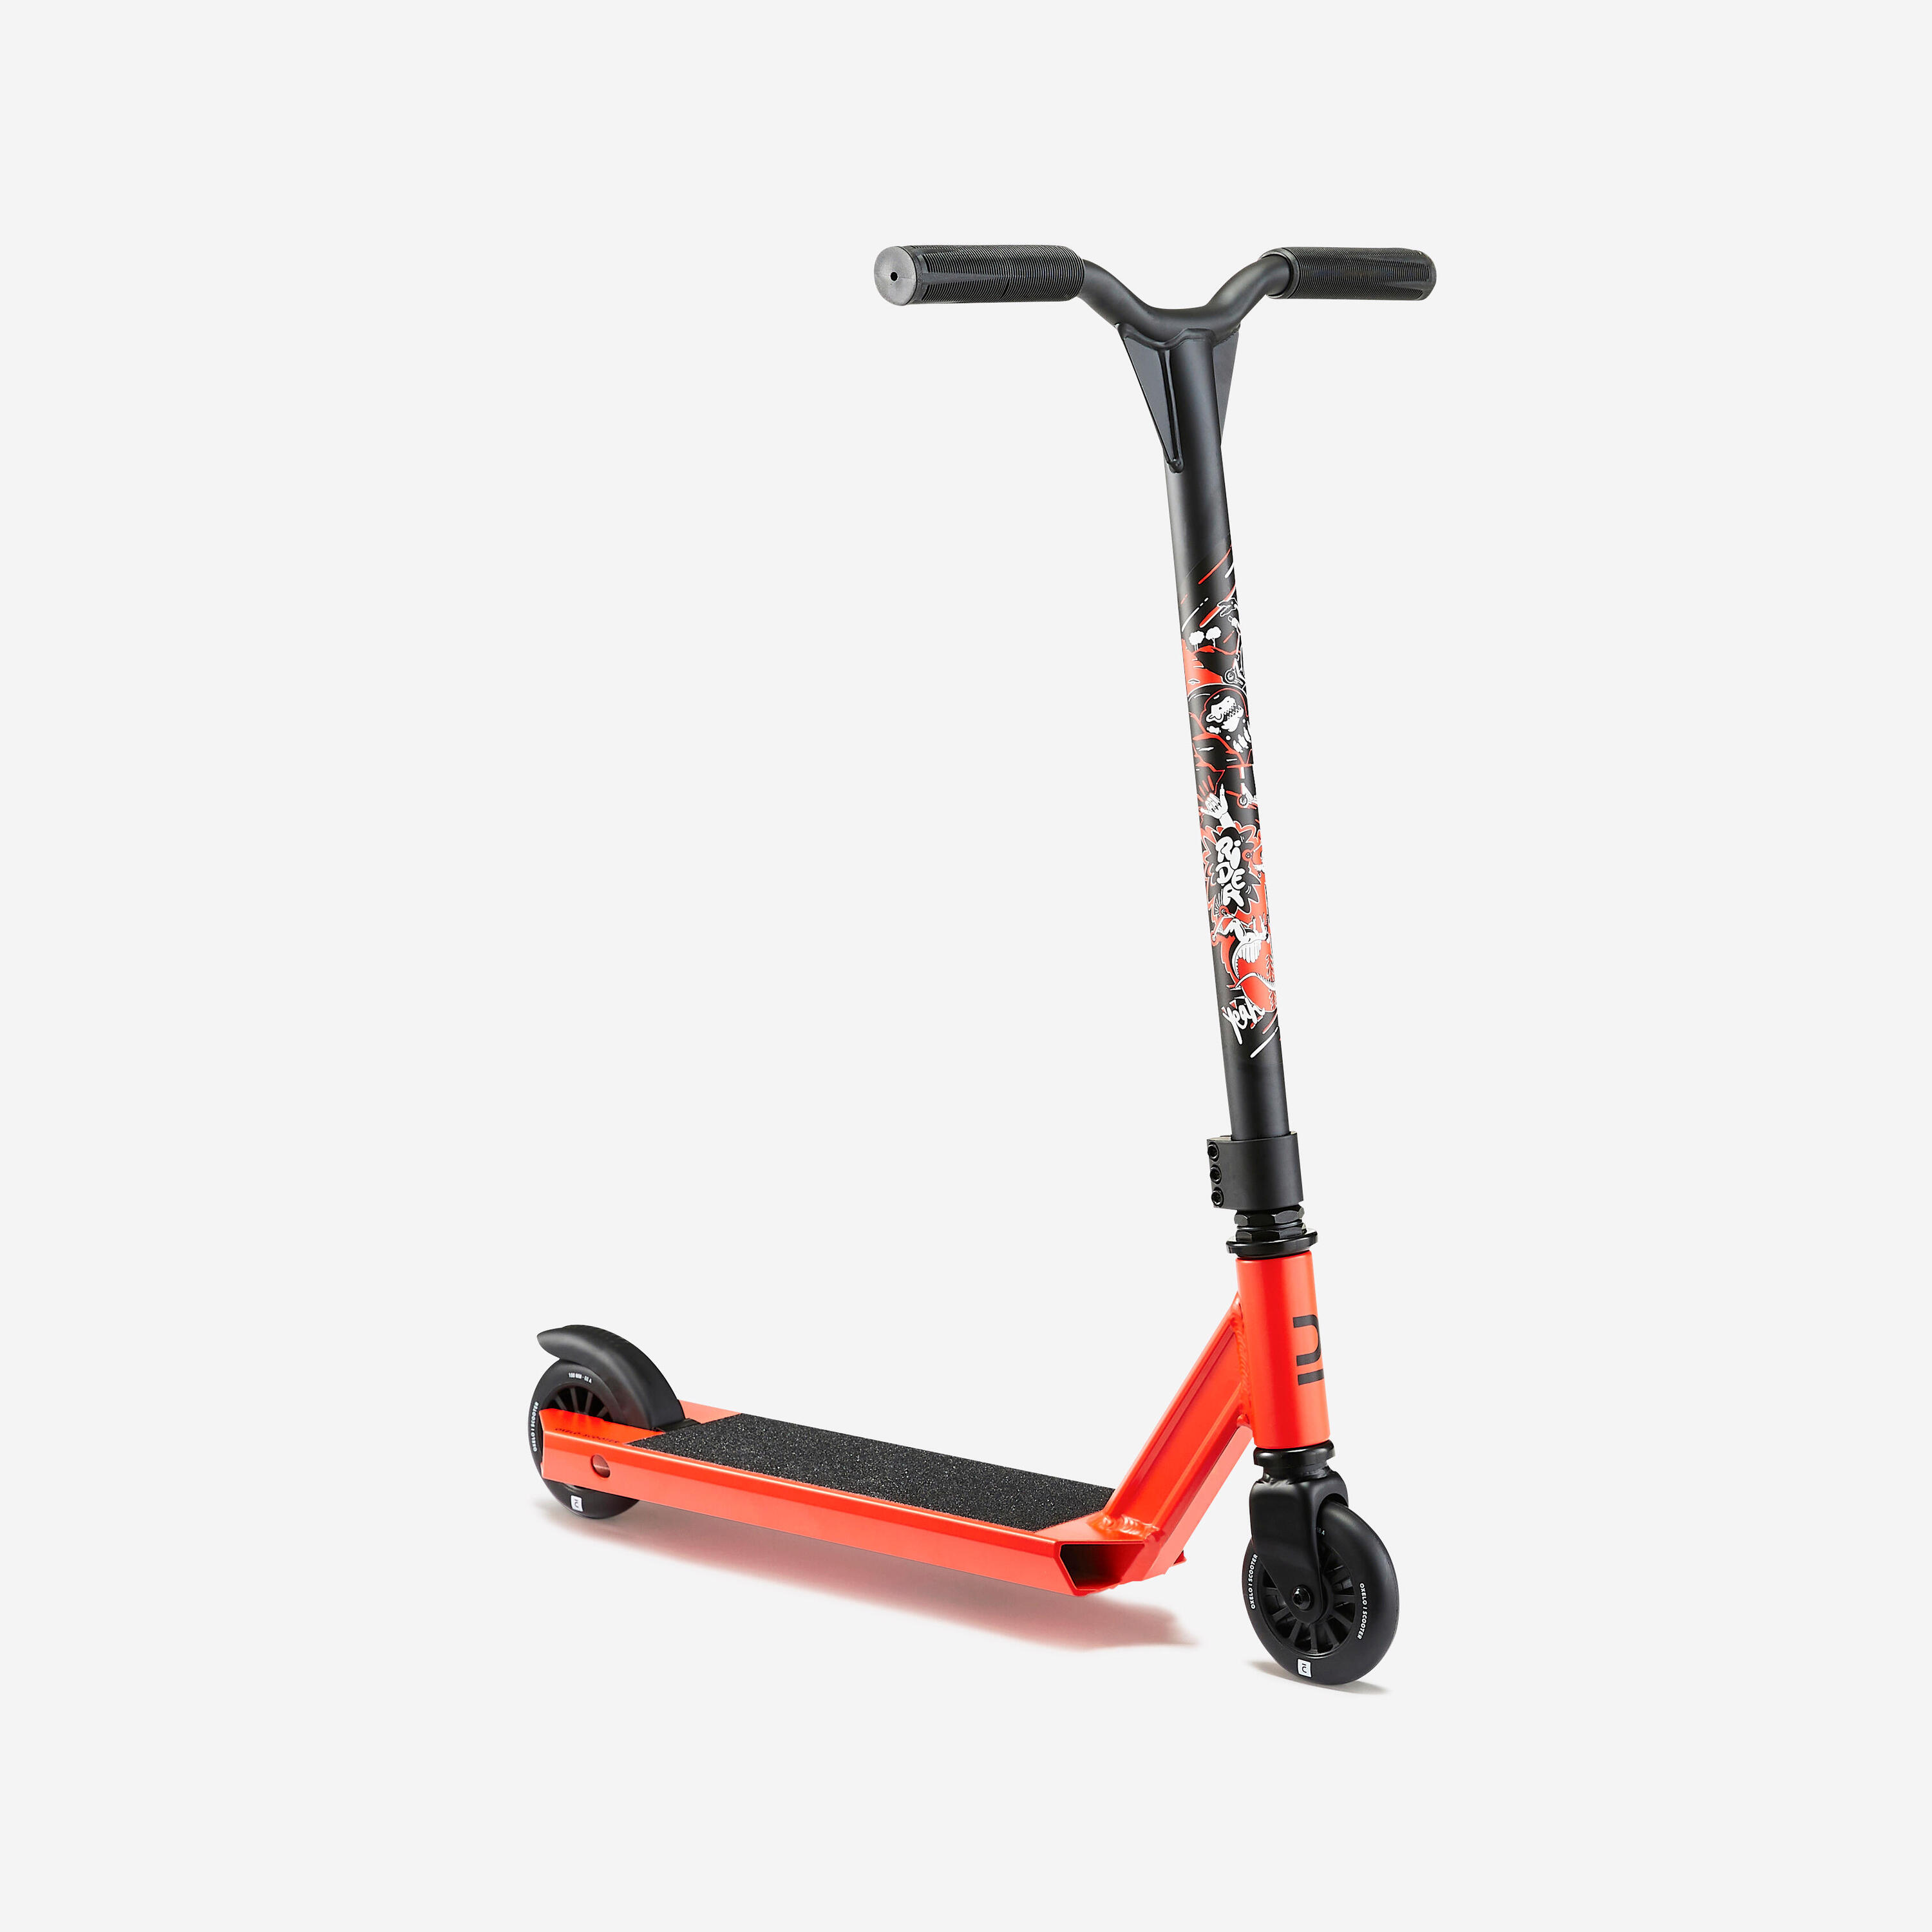 Freestyle Scooter MF100 - Red 1/8